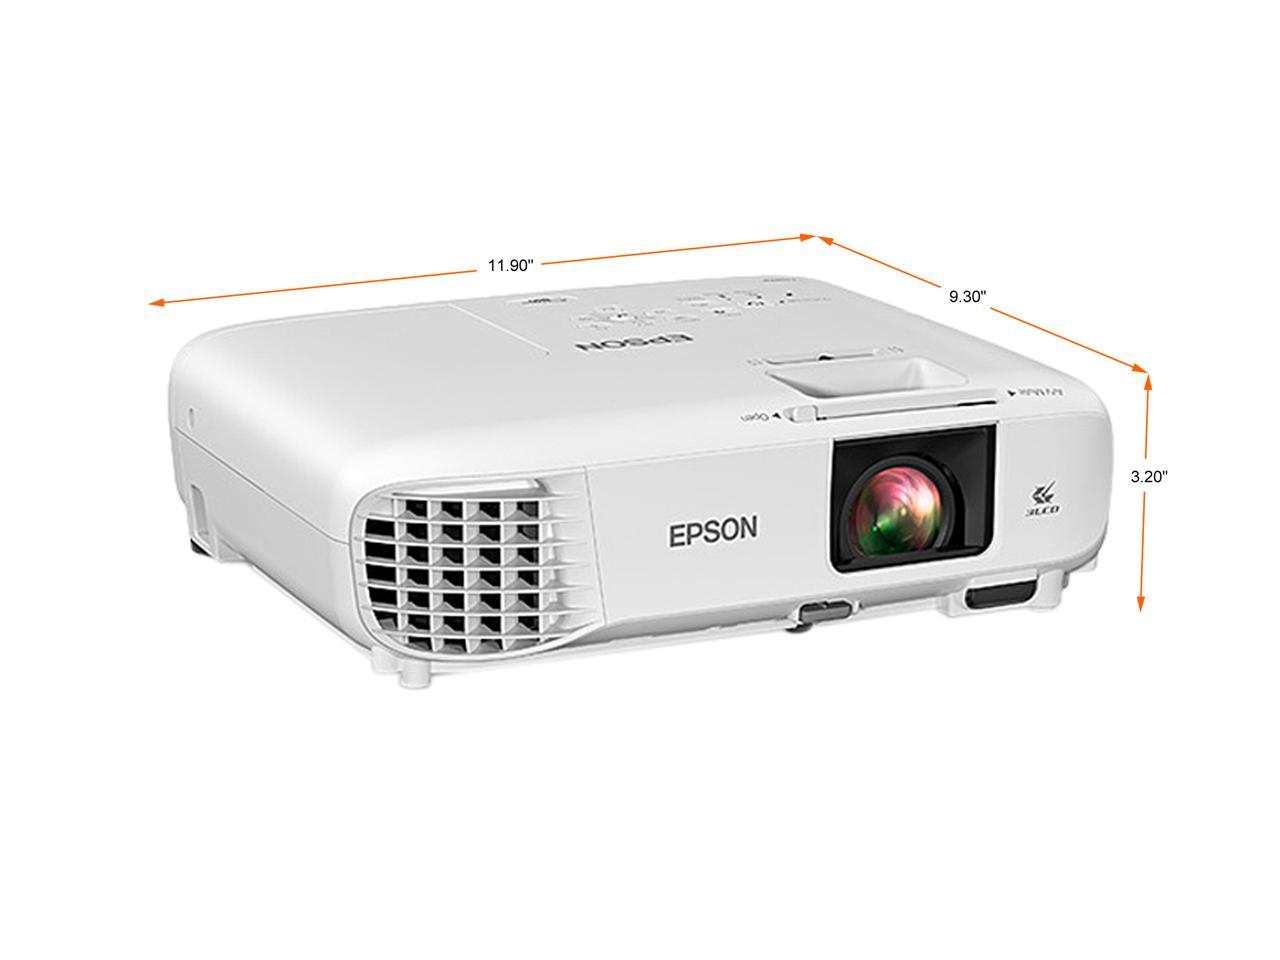 Epson Home Cinema 880 3LCD 1080p Projector, Built-in Speaker, 16,000:1 Contrast Ratio, HDMI - image 3 of 5